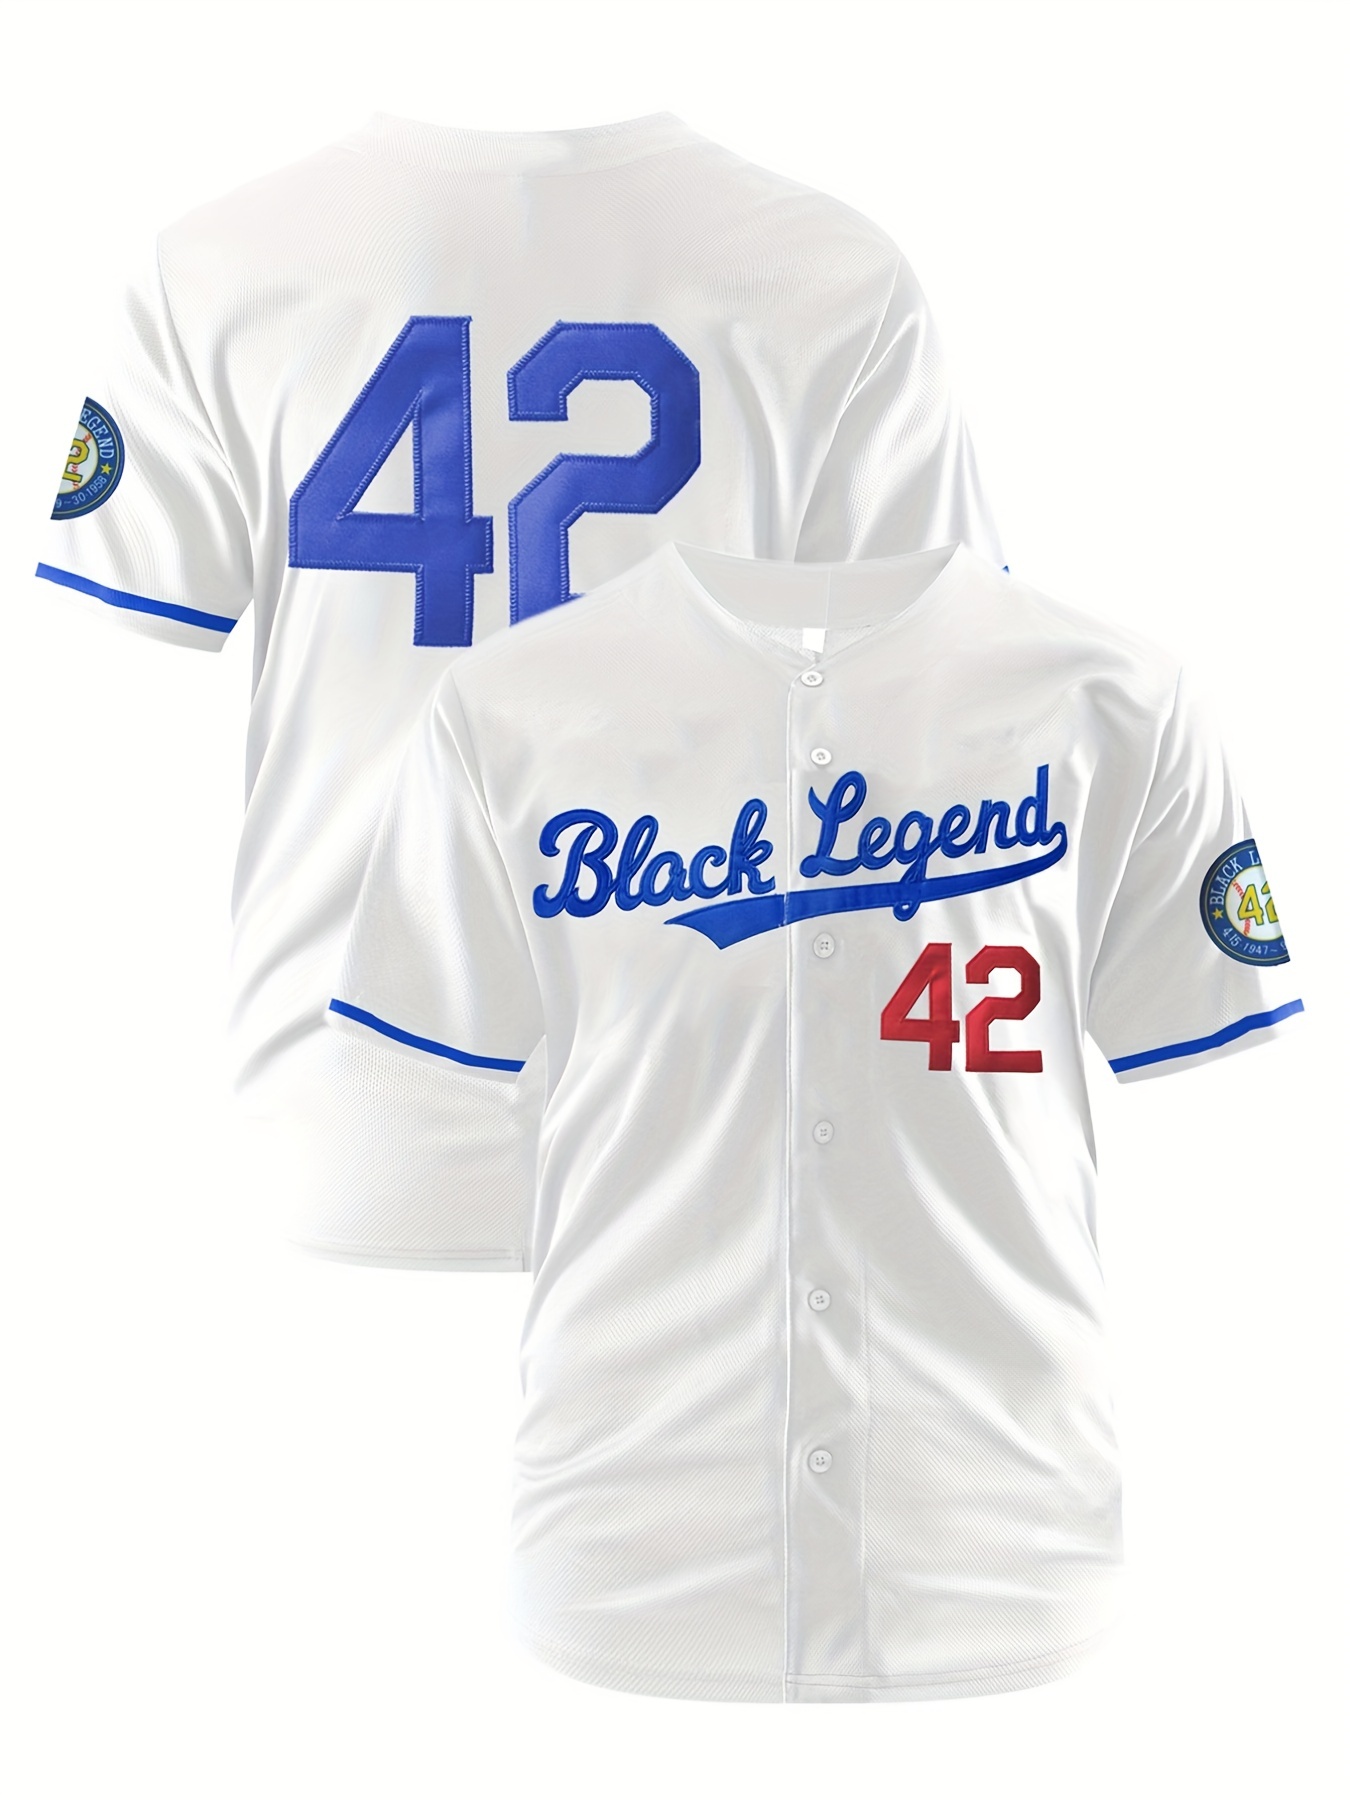 Men's #42 Baseball Jersey, Retro Baseball Shirt, Breathable Embroidery Button Up Short Sleeve Sports Uniform for Training Competition Party